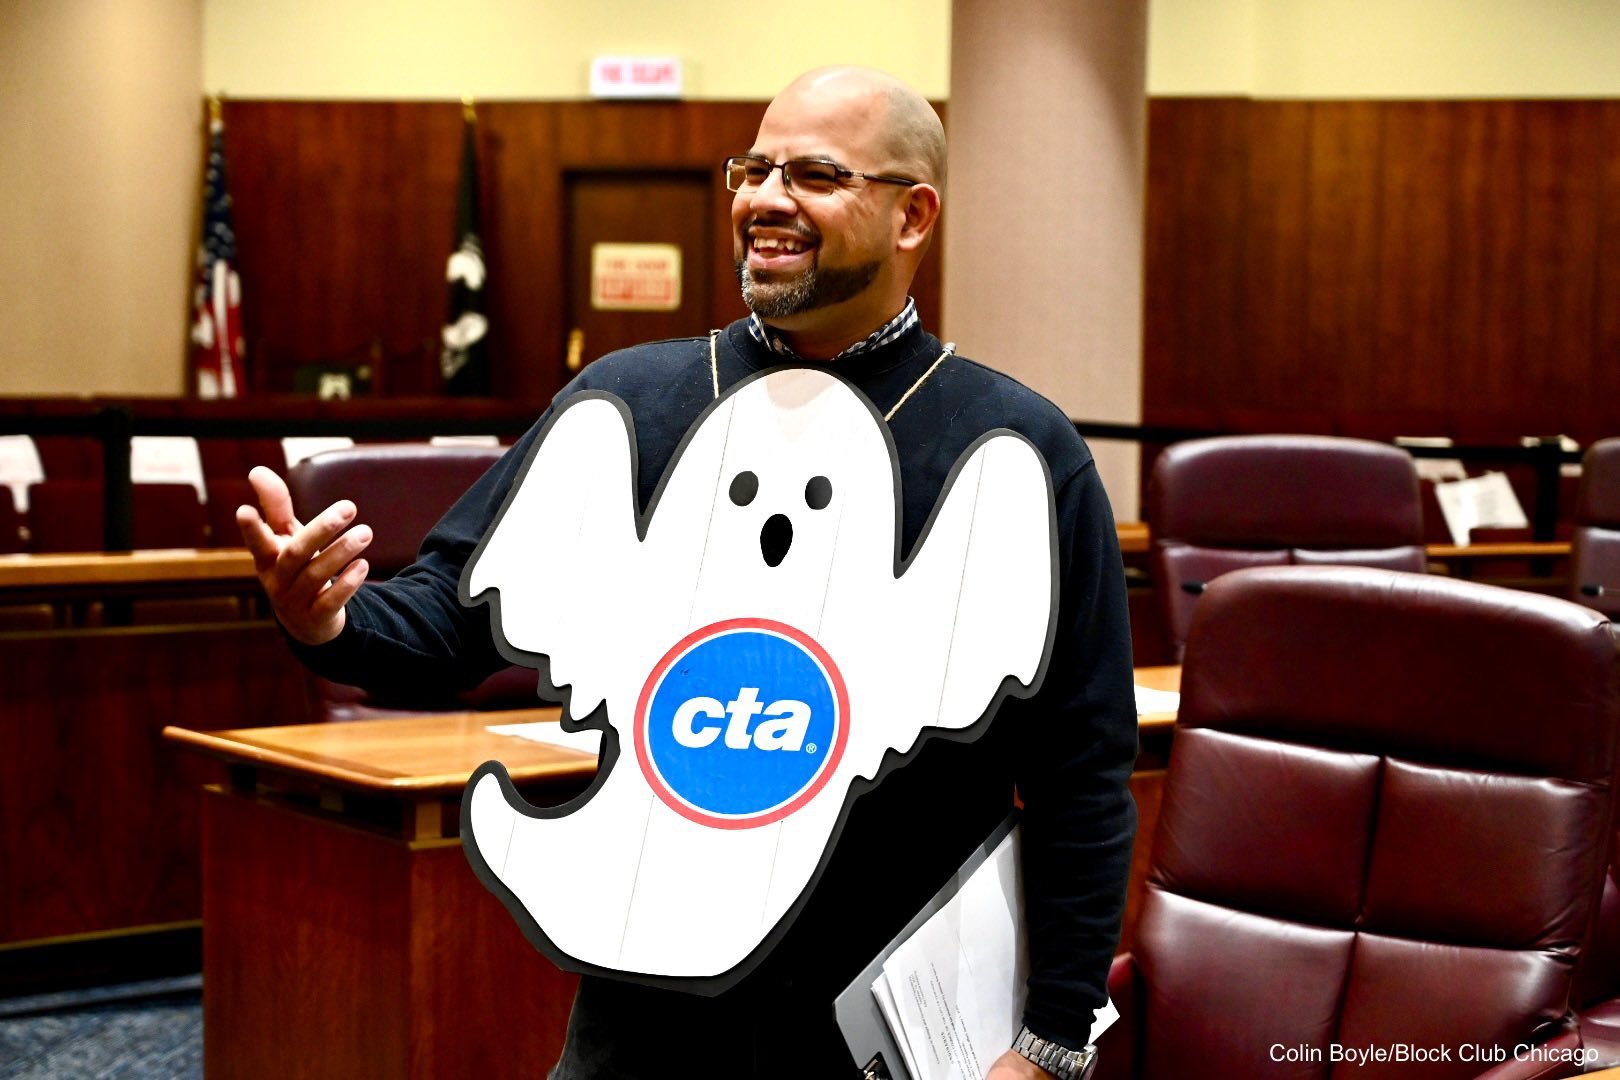 Andre Vasquez smiles at a pre-halloween City Council meeting wearing a "ghost" placard that has the CTA logo on it.